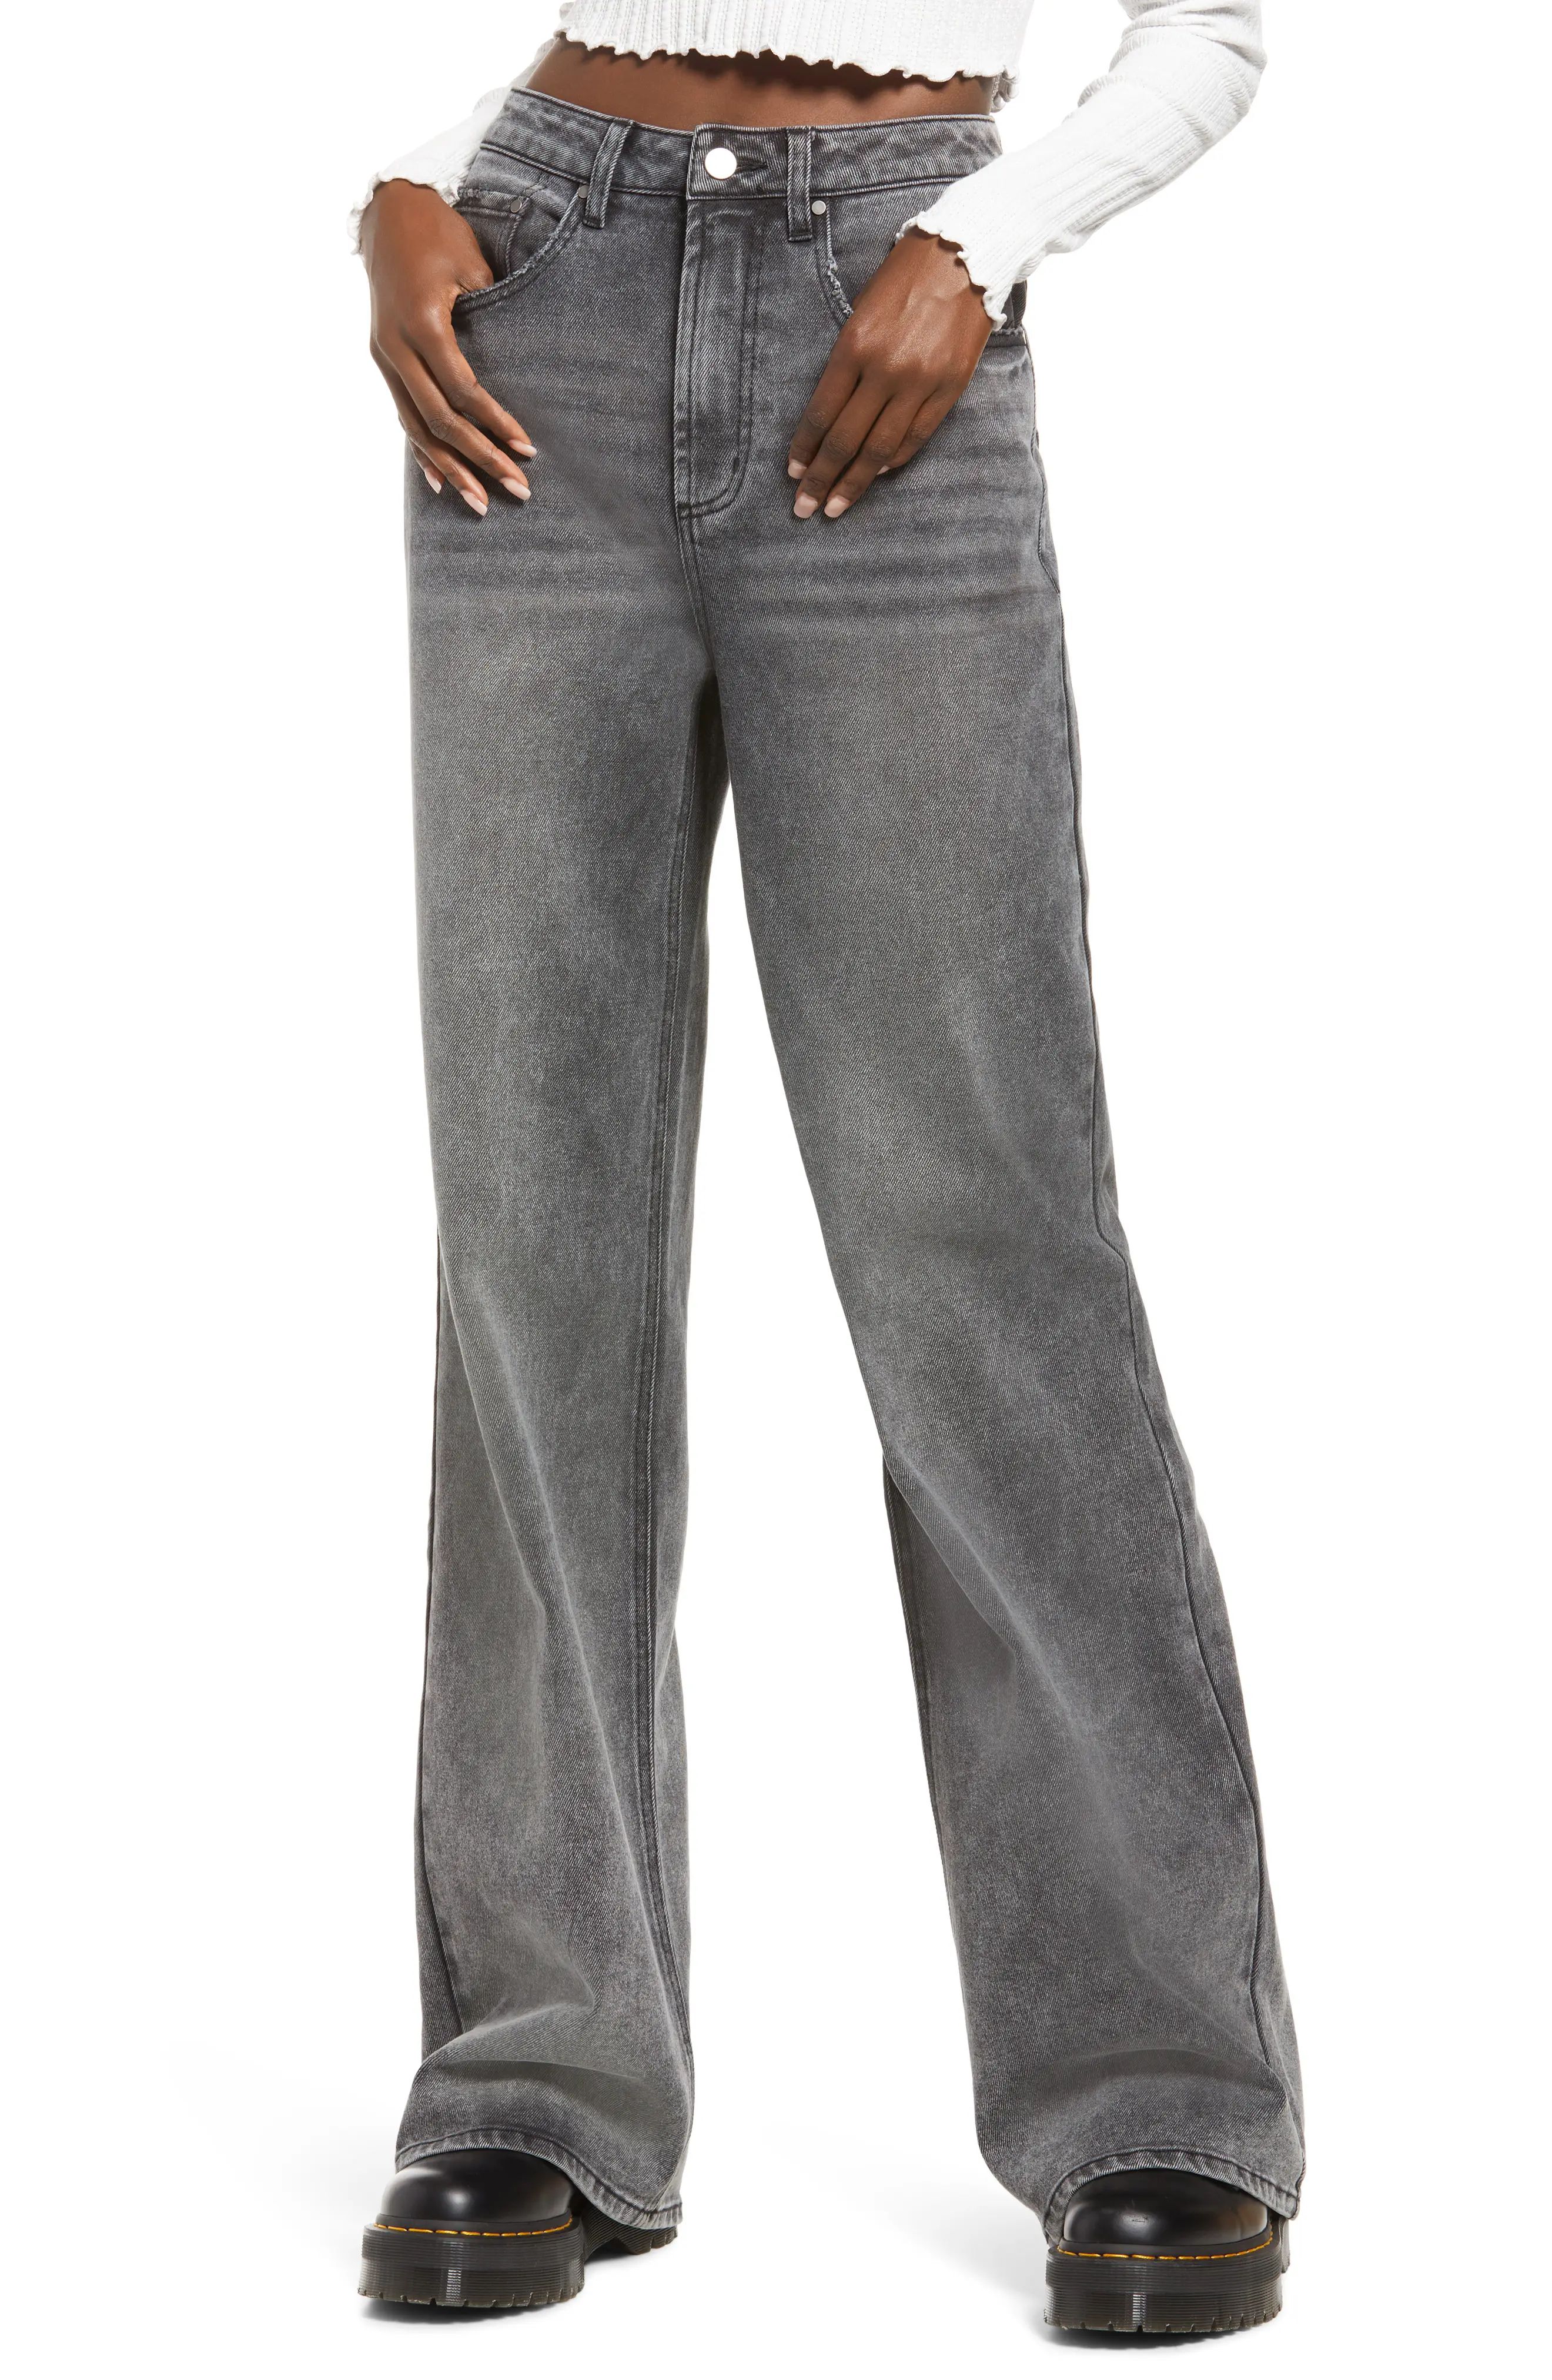 BP. High Waist Wide Leg Jeans in Charcoal Grey Wash at Nordstrom, Size 27 | Nordstrom